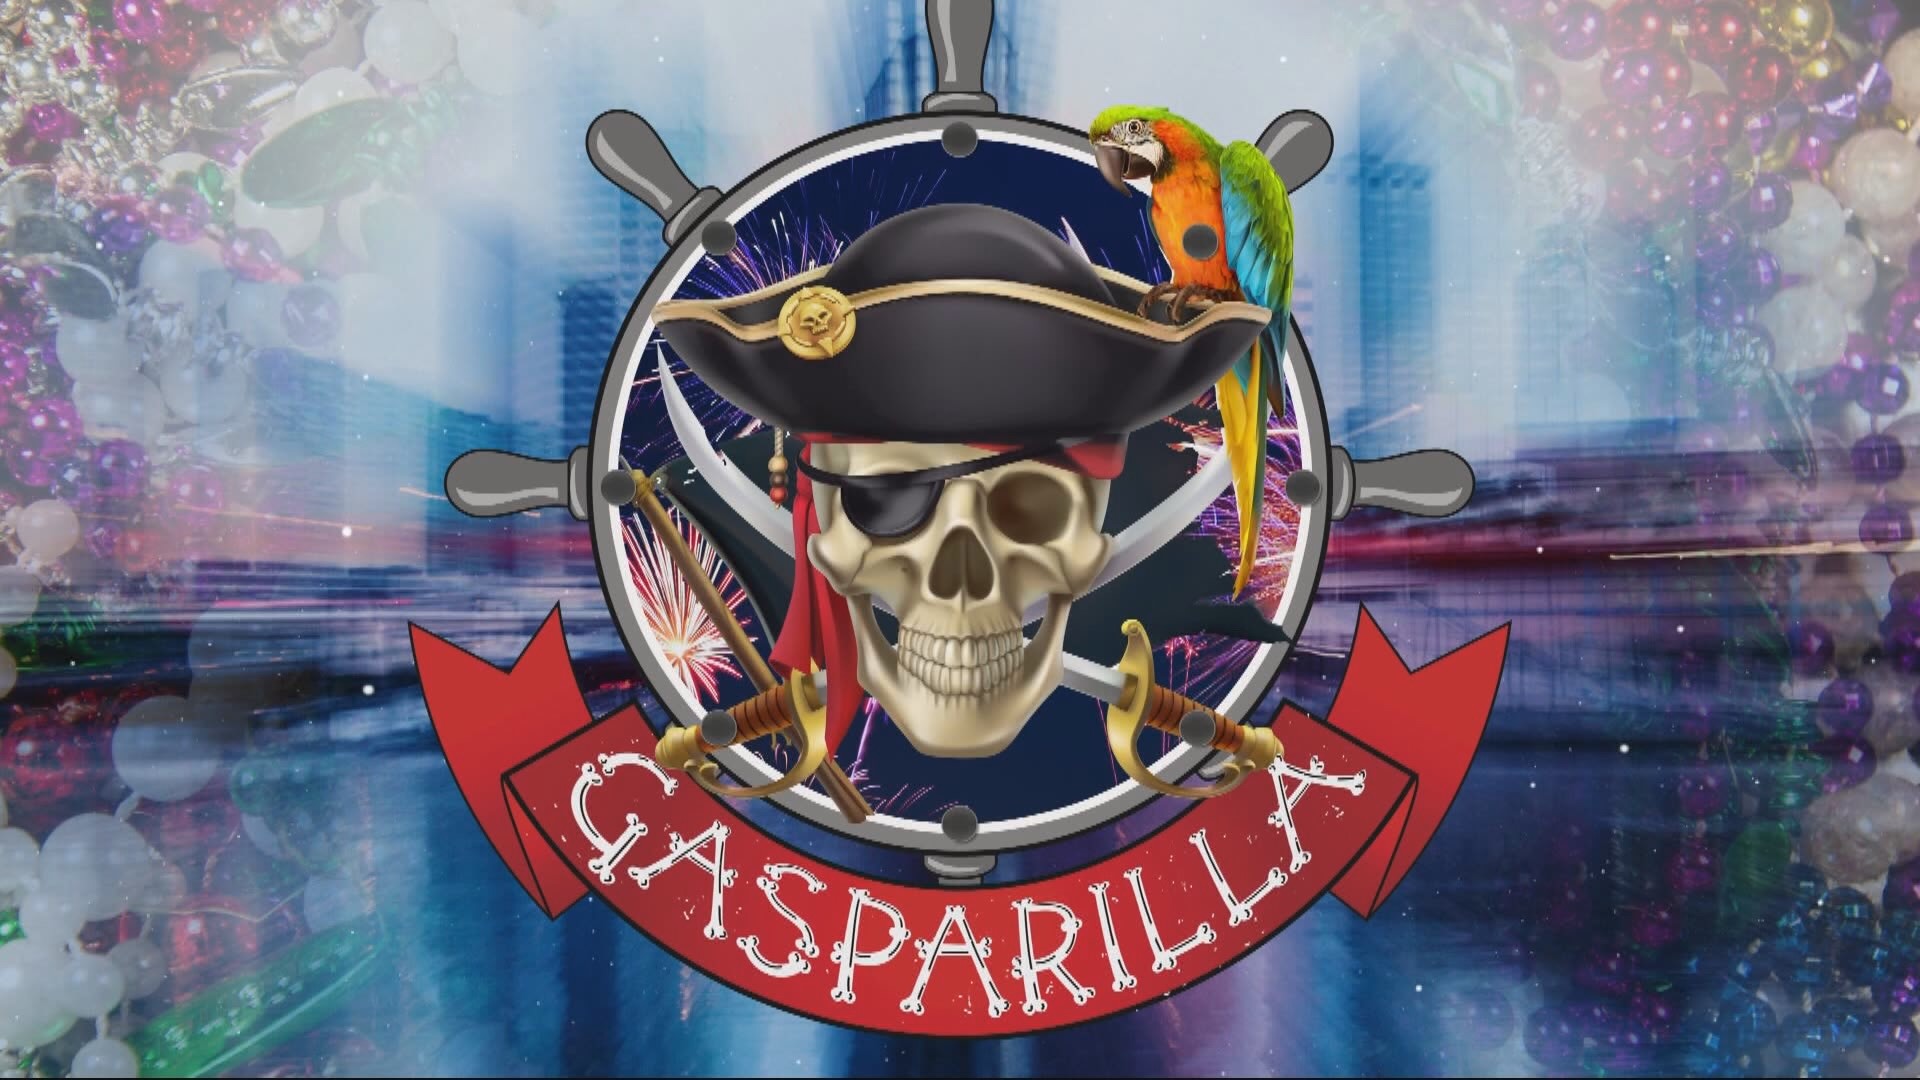 Need to know where to drink? Or where to park for the parade? We've got you covered for this year's Gasparilla Pirate Festival.